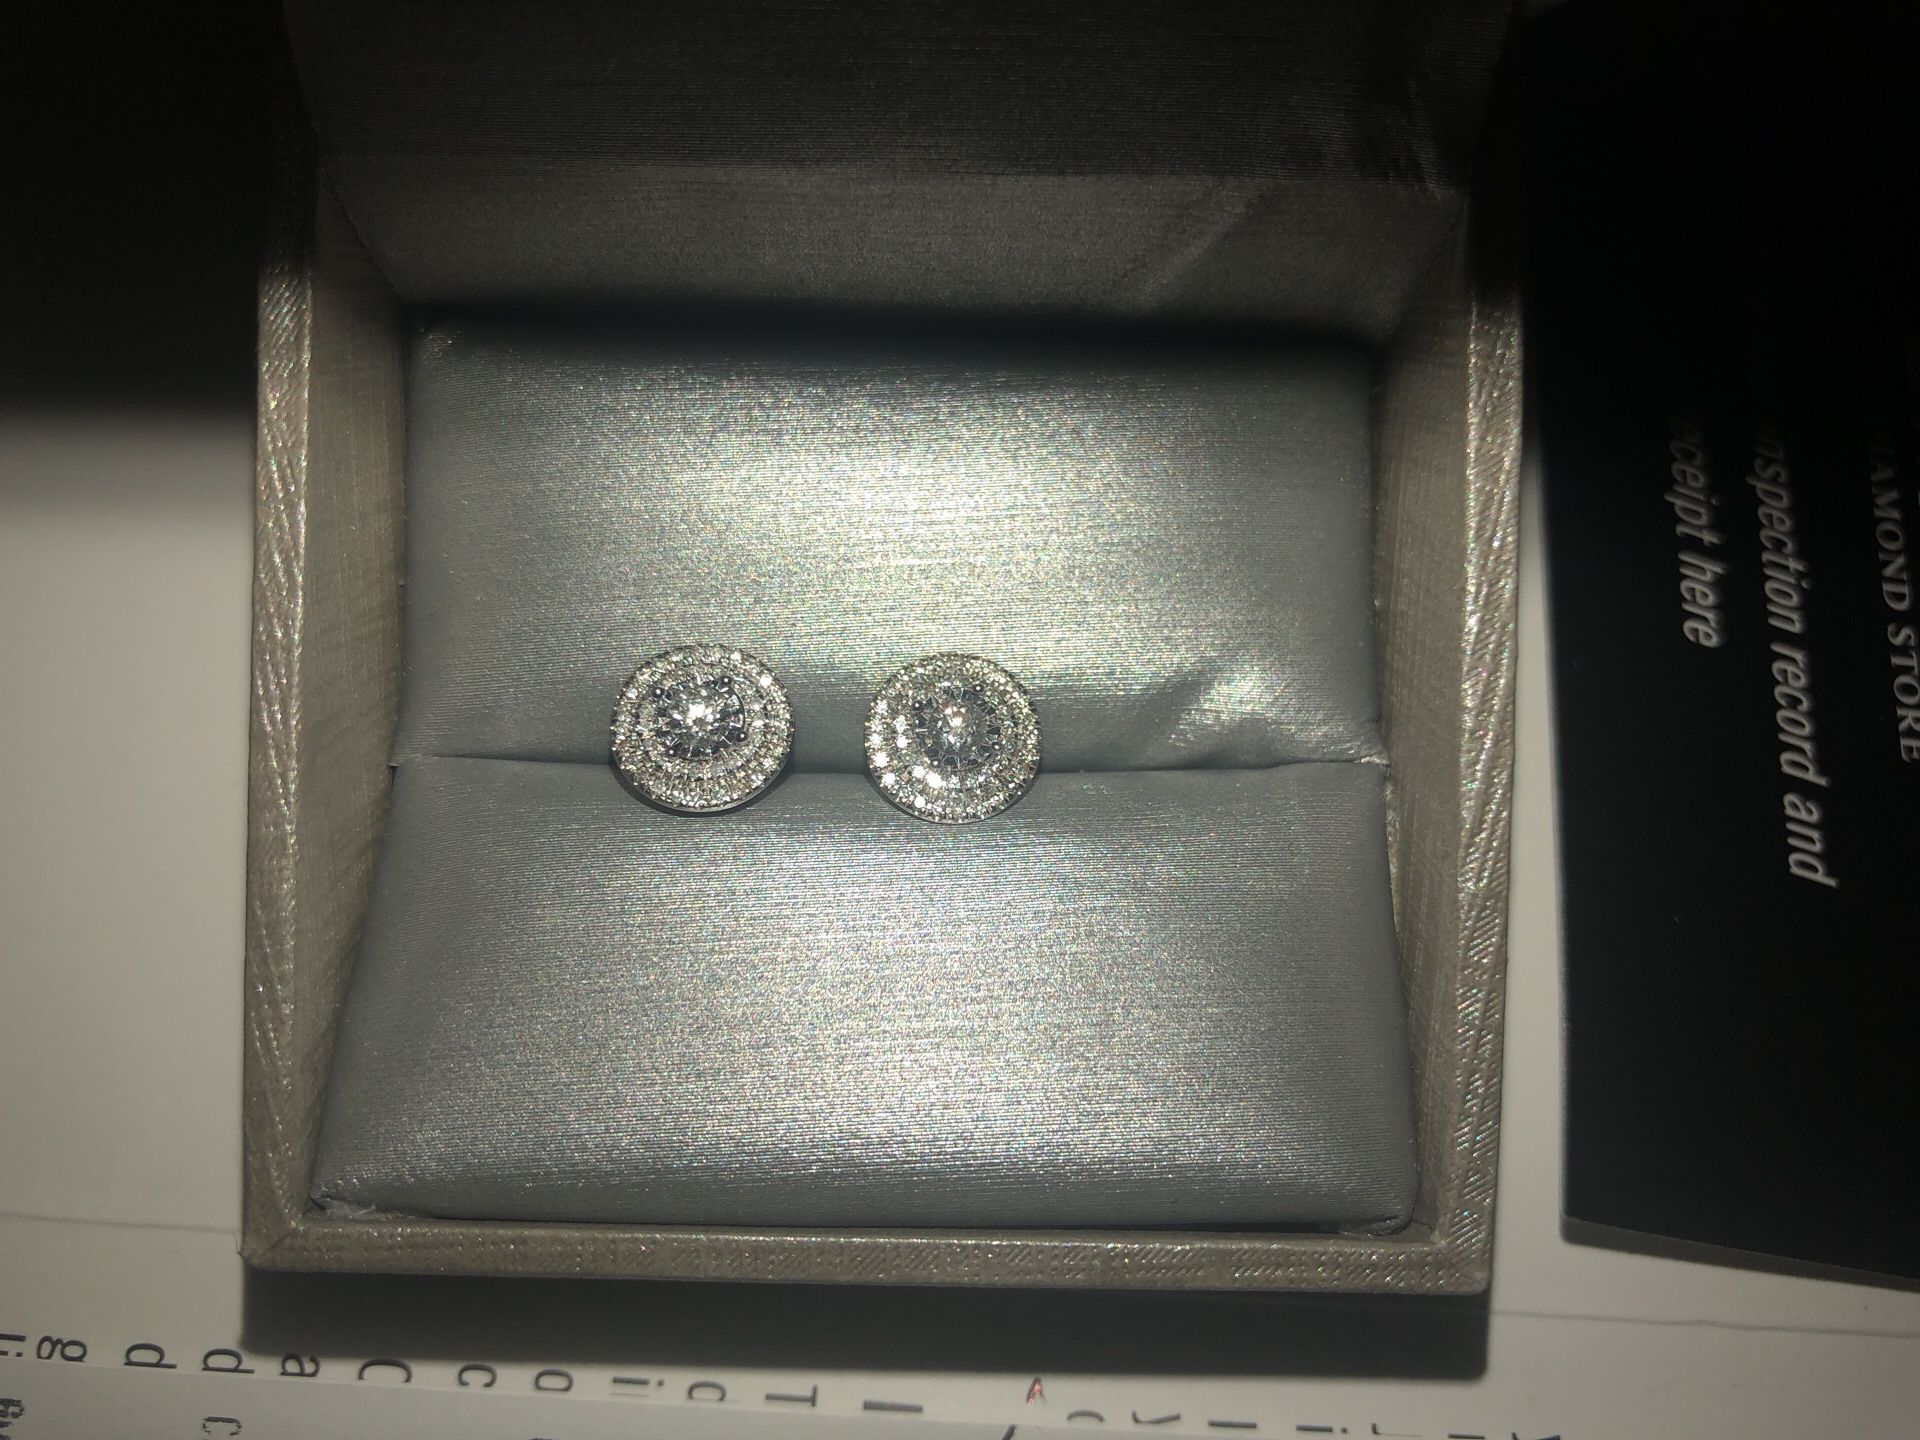 1/2 carrot diamond earrings worth $1000 selling for $300 receipt inside 100% authentic